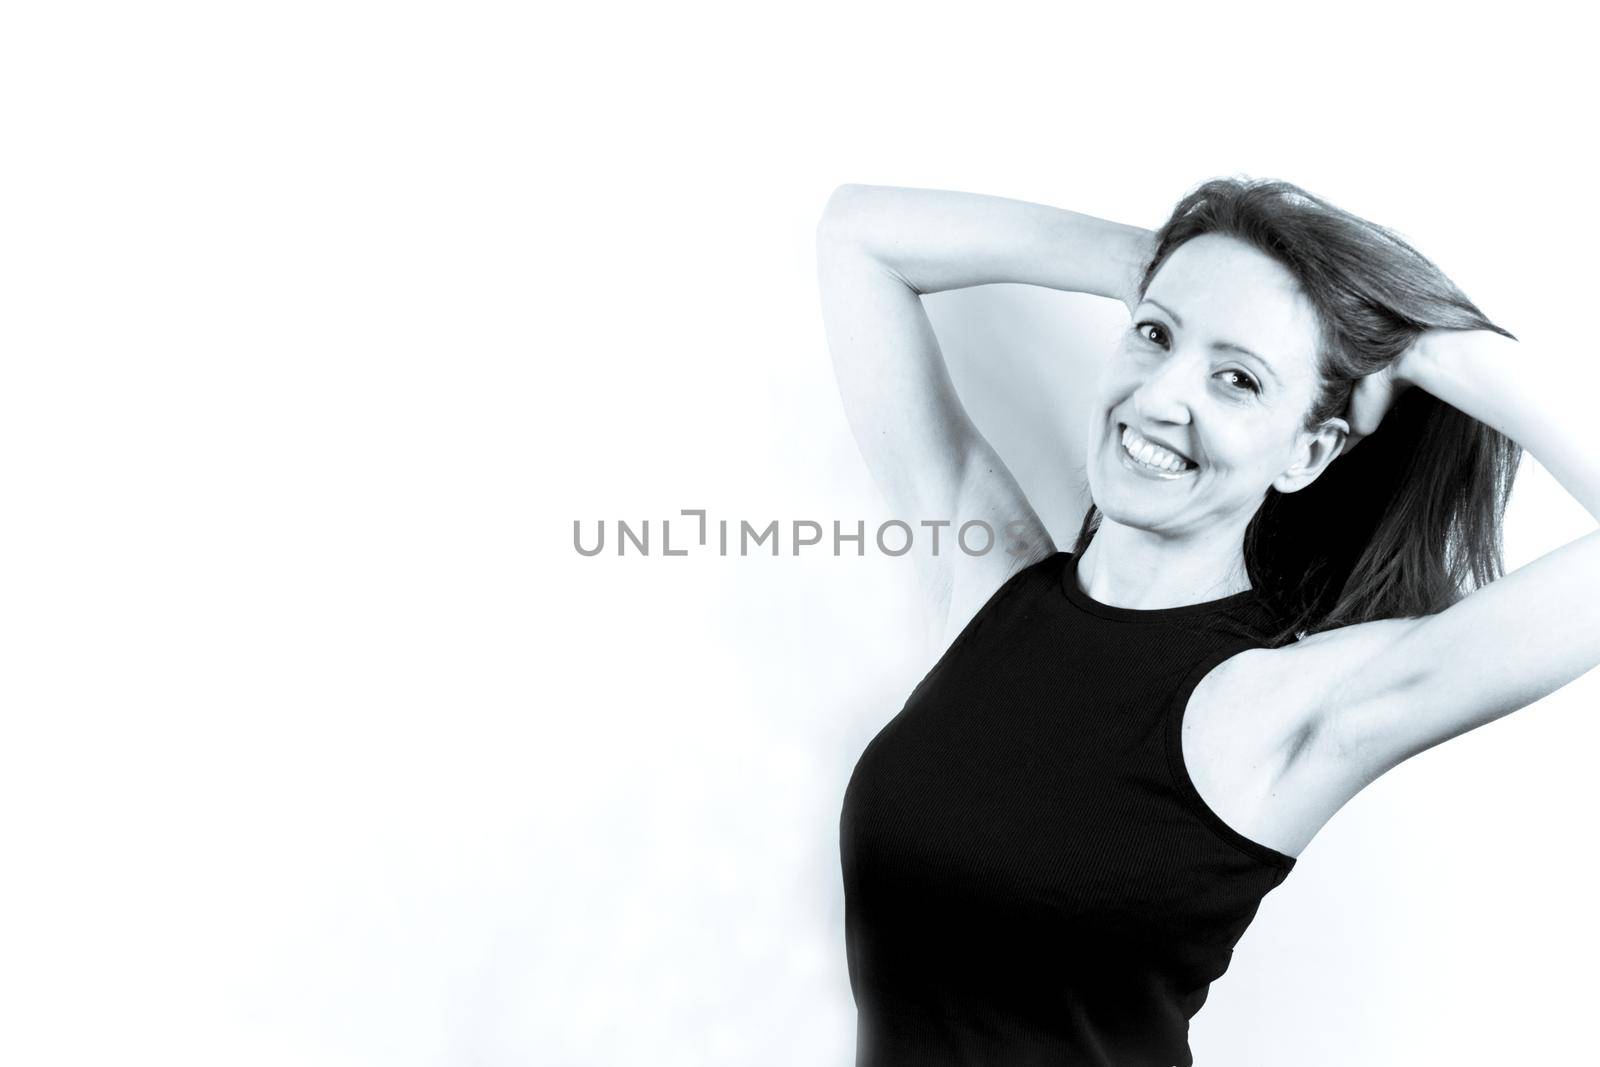 Forty year old woman with happy, joyful and positive expression. Black tshirt and light background